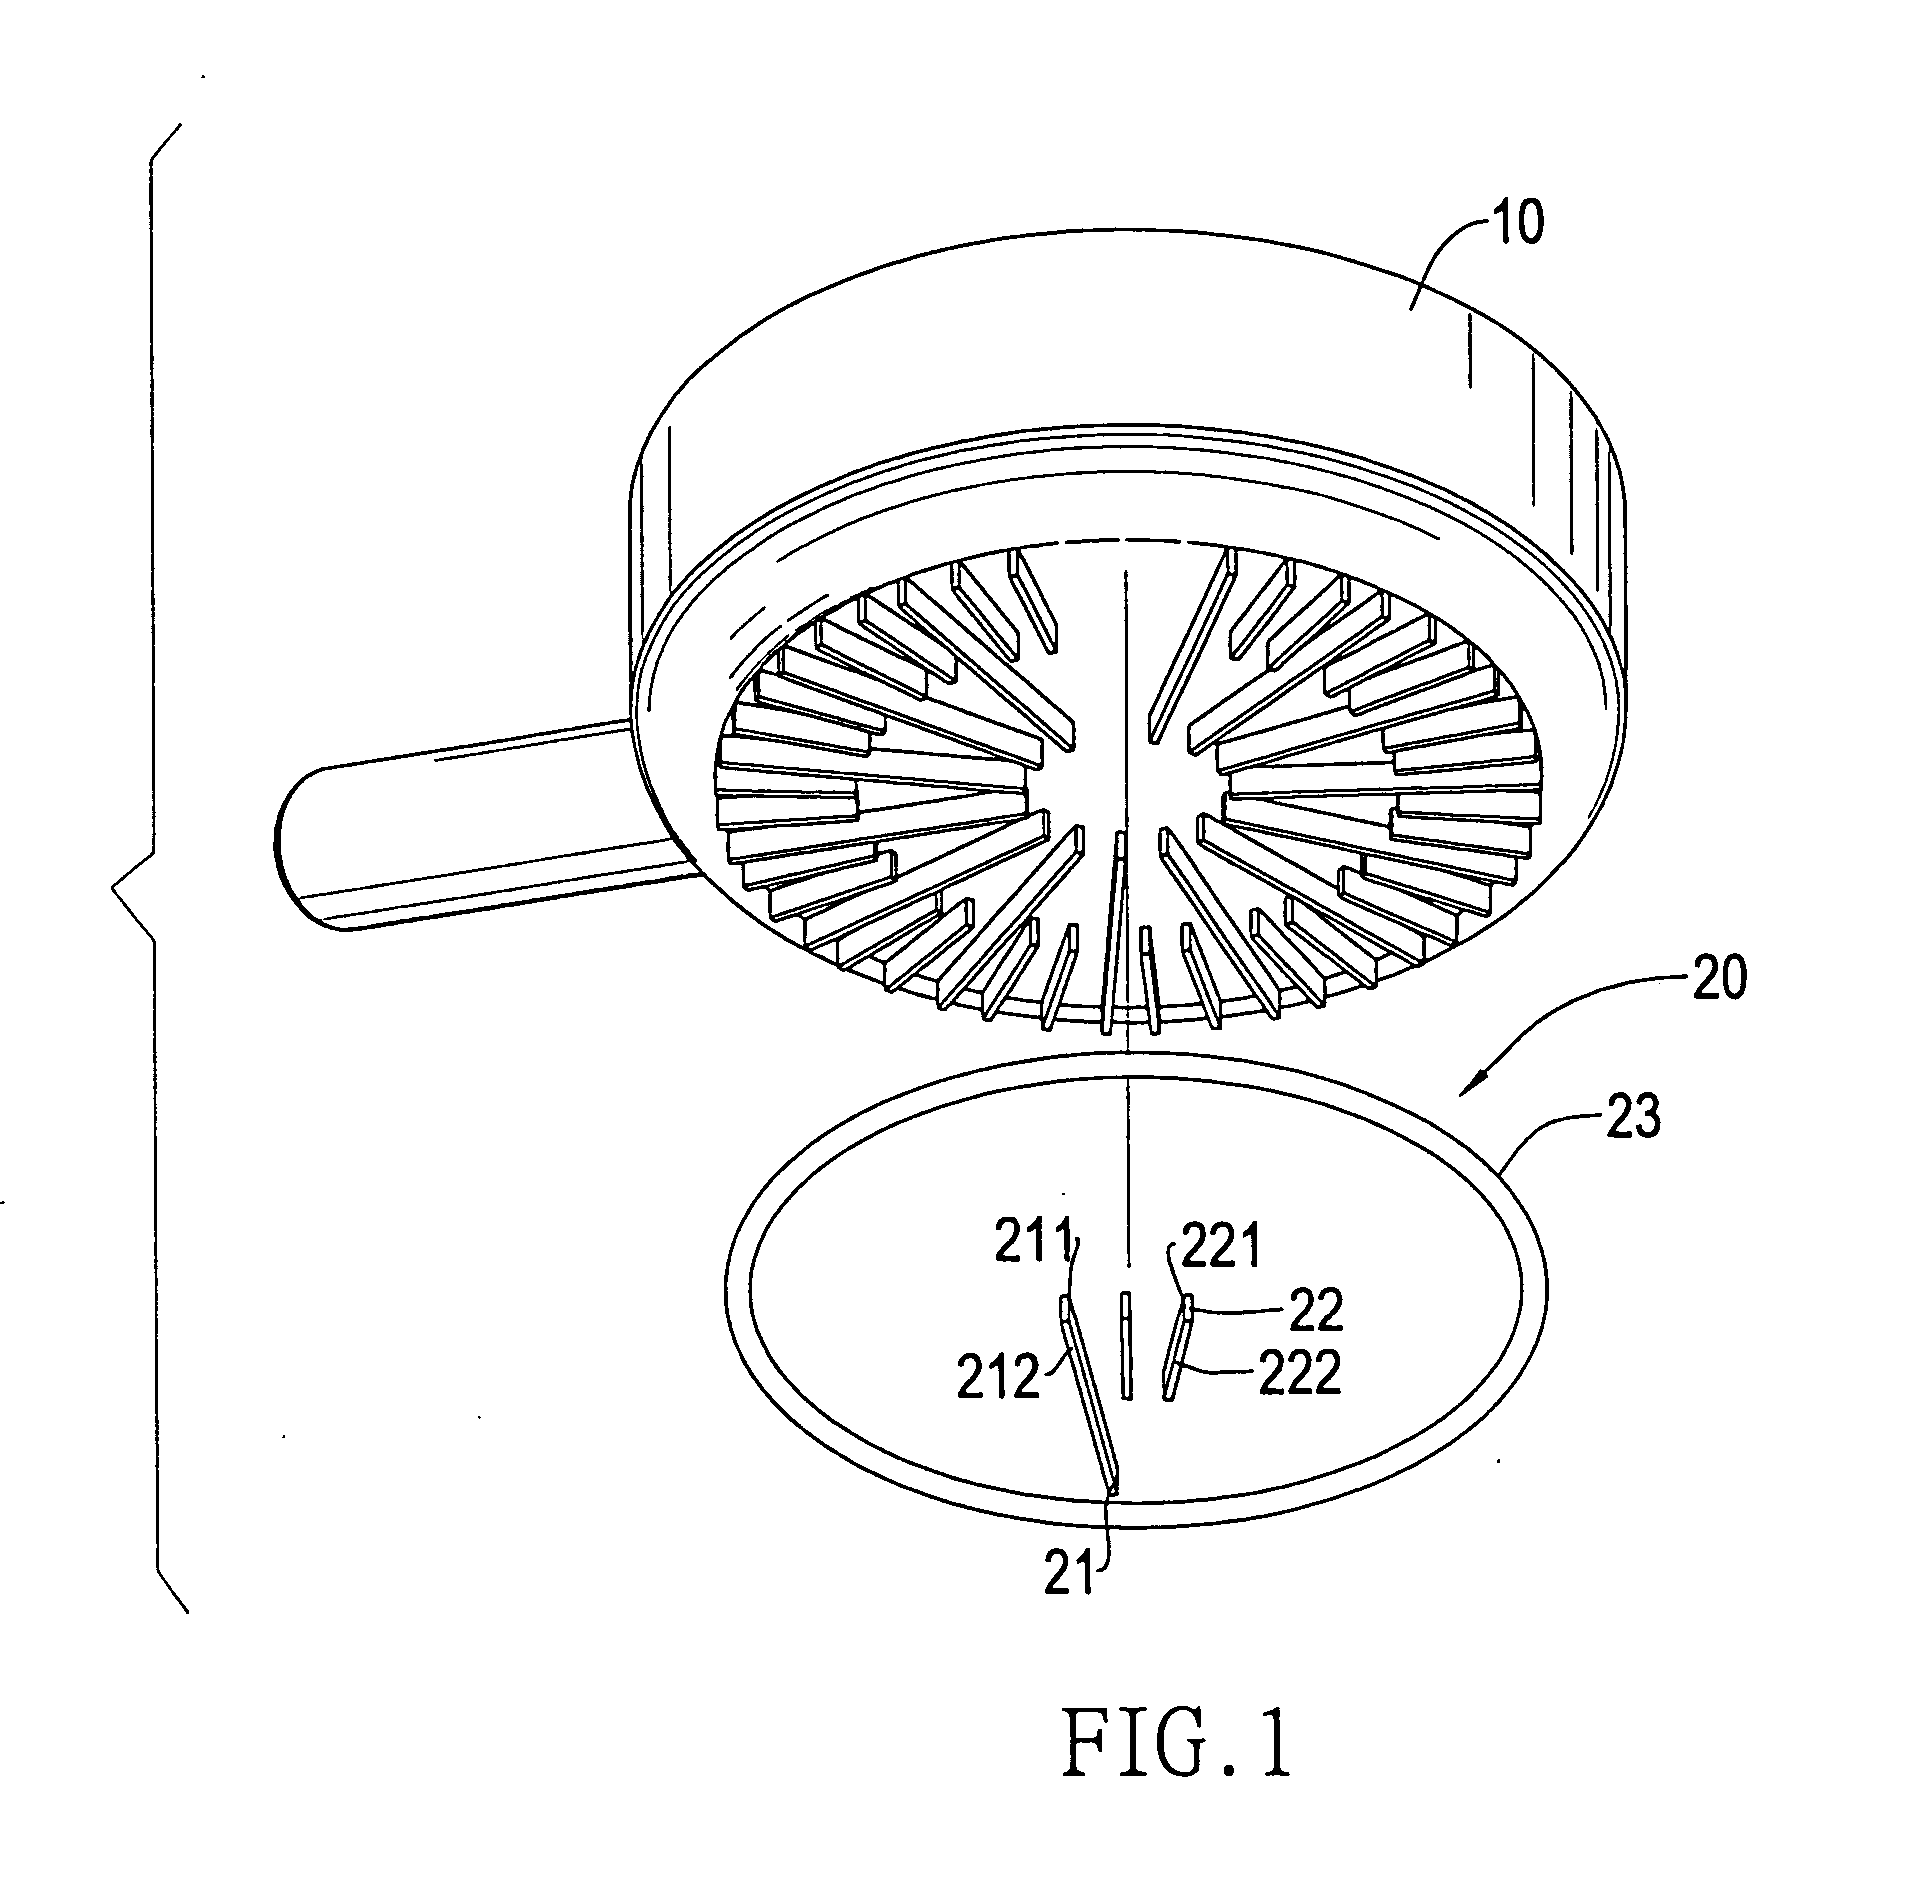 Container having a heat concentration assembly securely formed on a bottom of the container